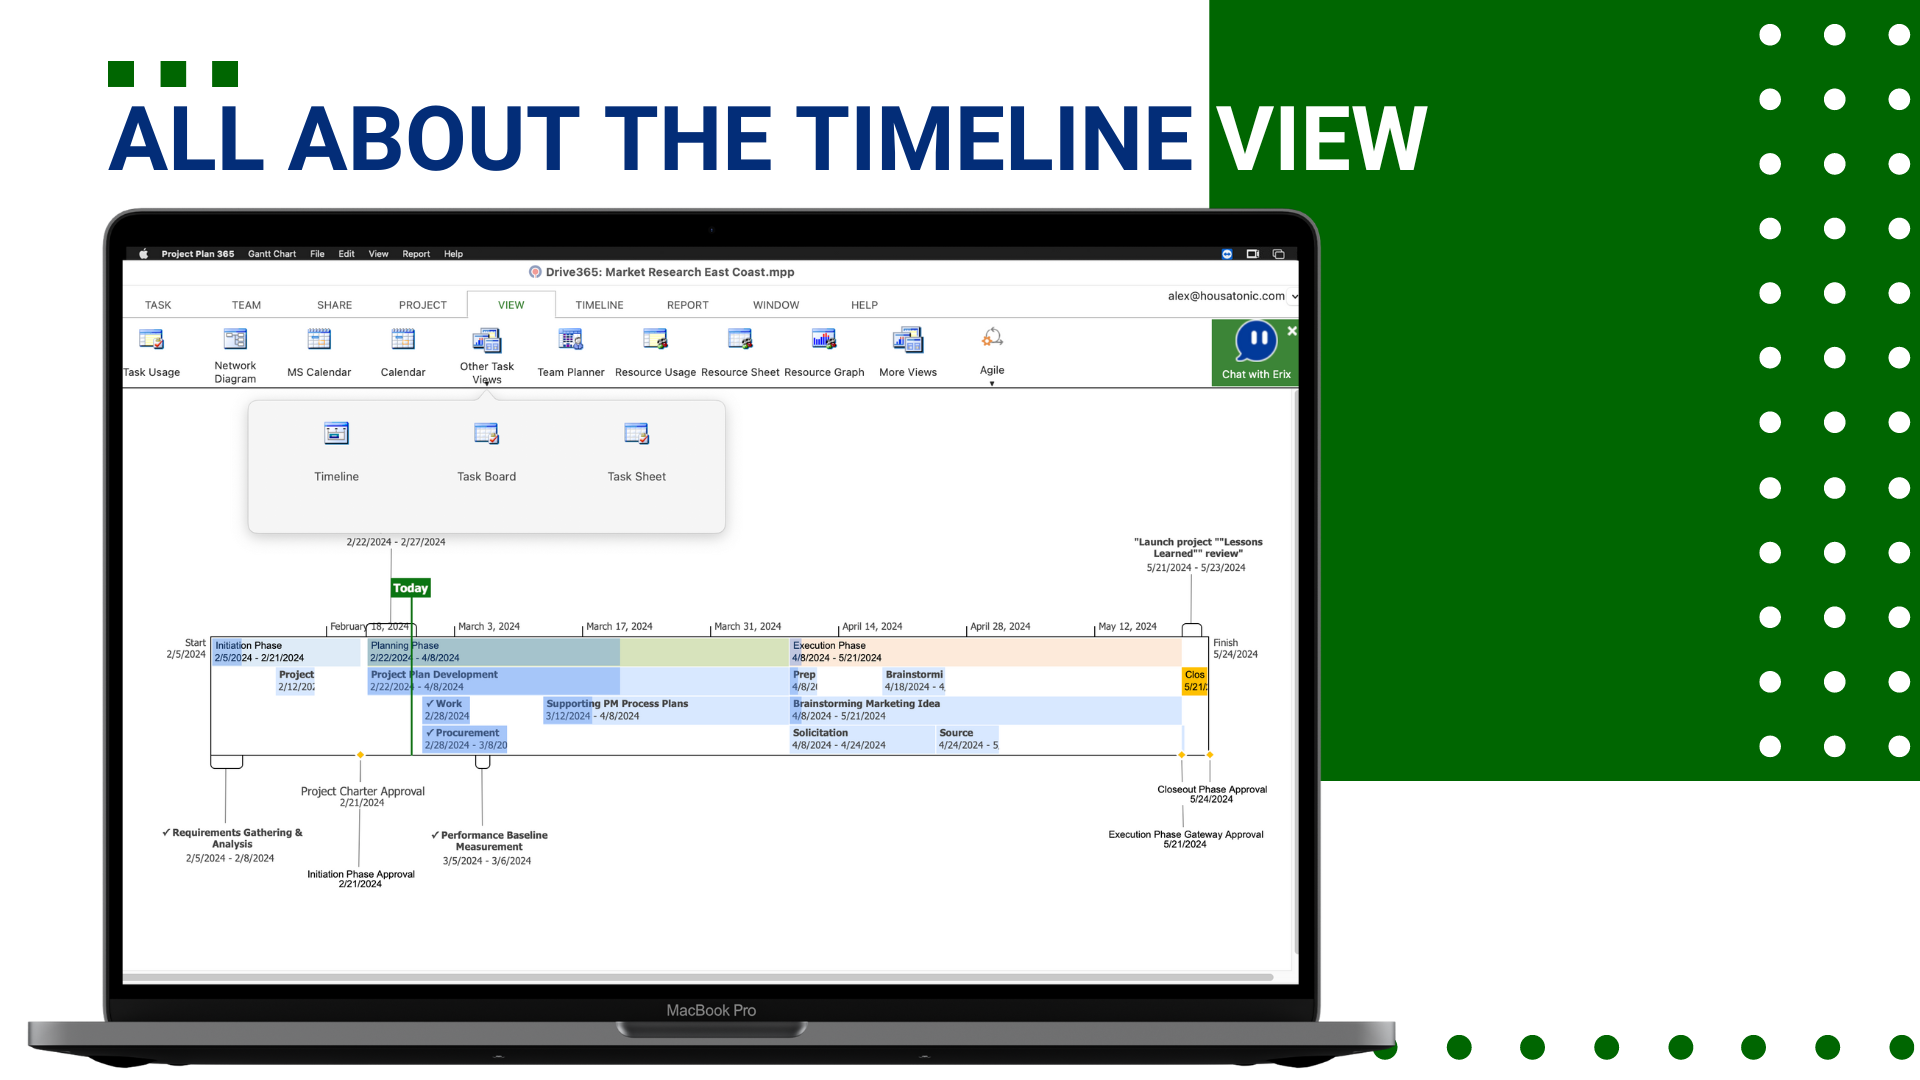 All About Timeline View